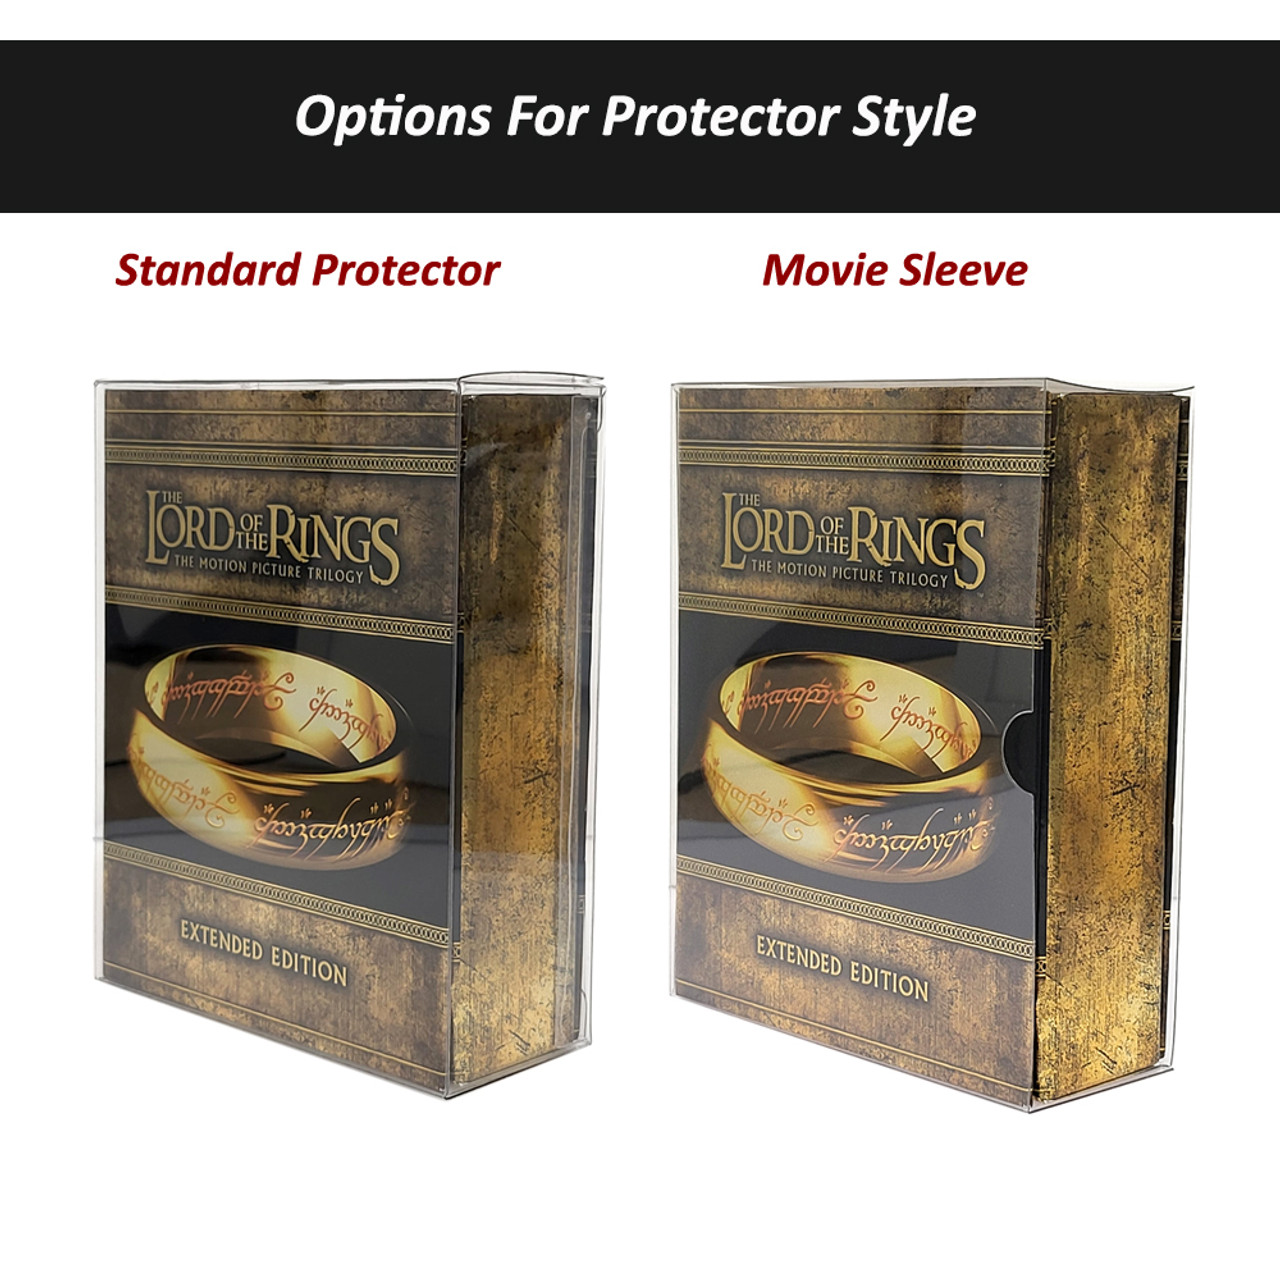 Protector For Universal Monsters Blu ray Collection Box Set